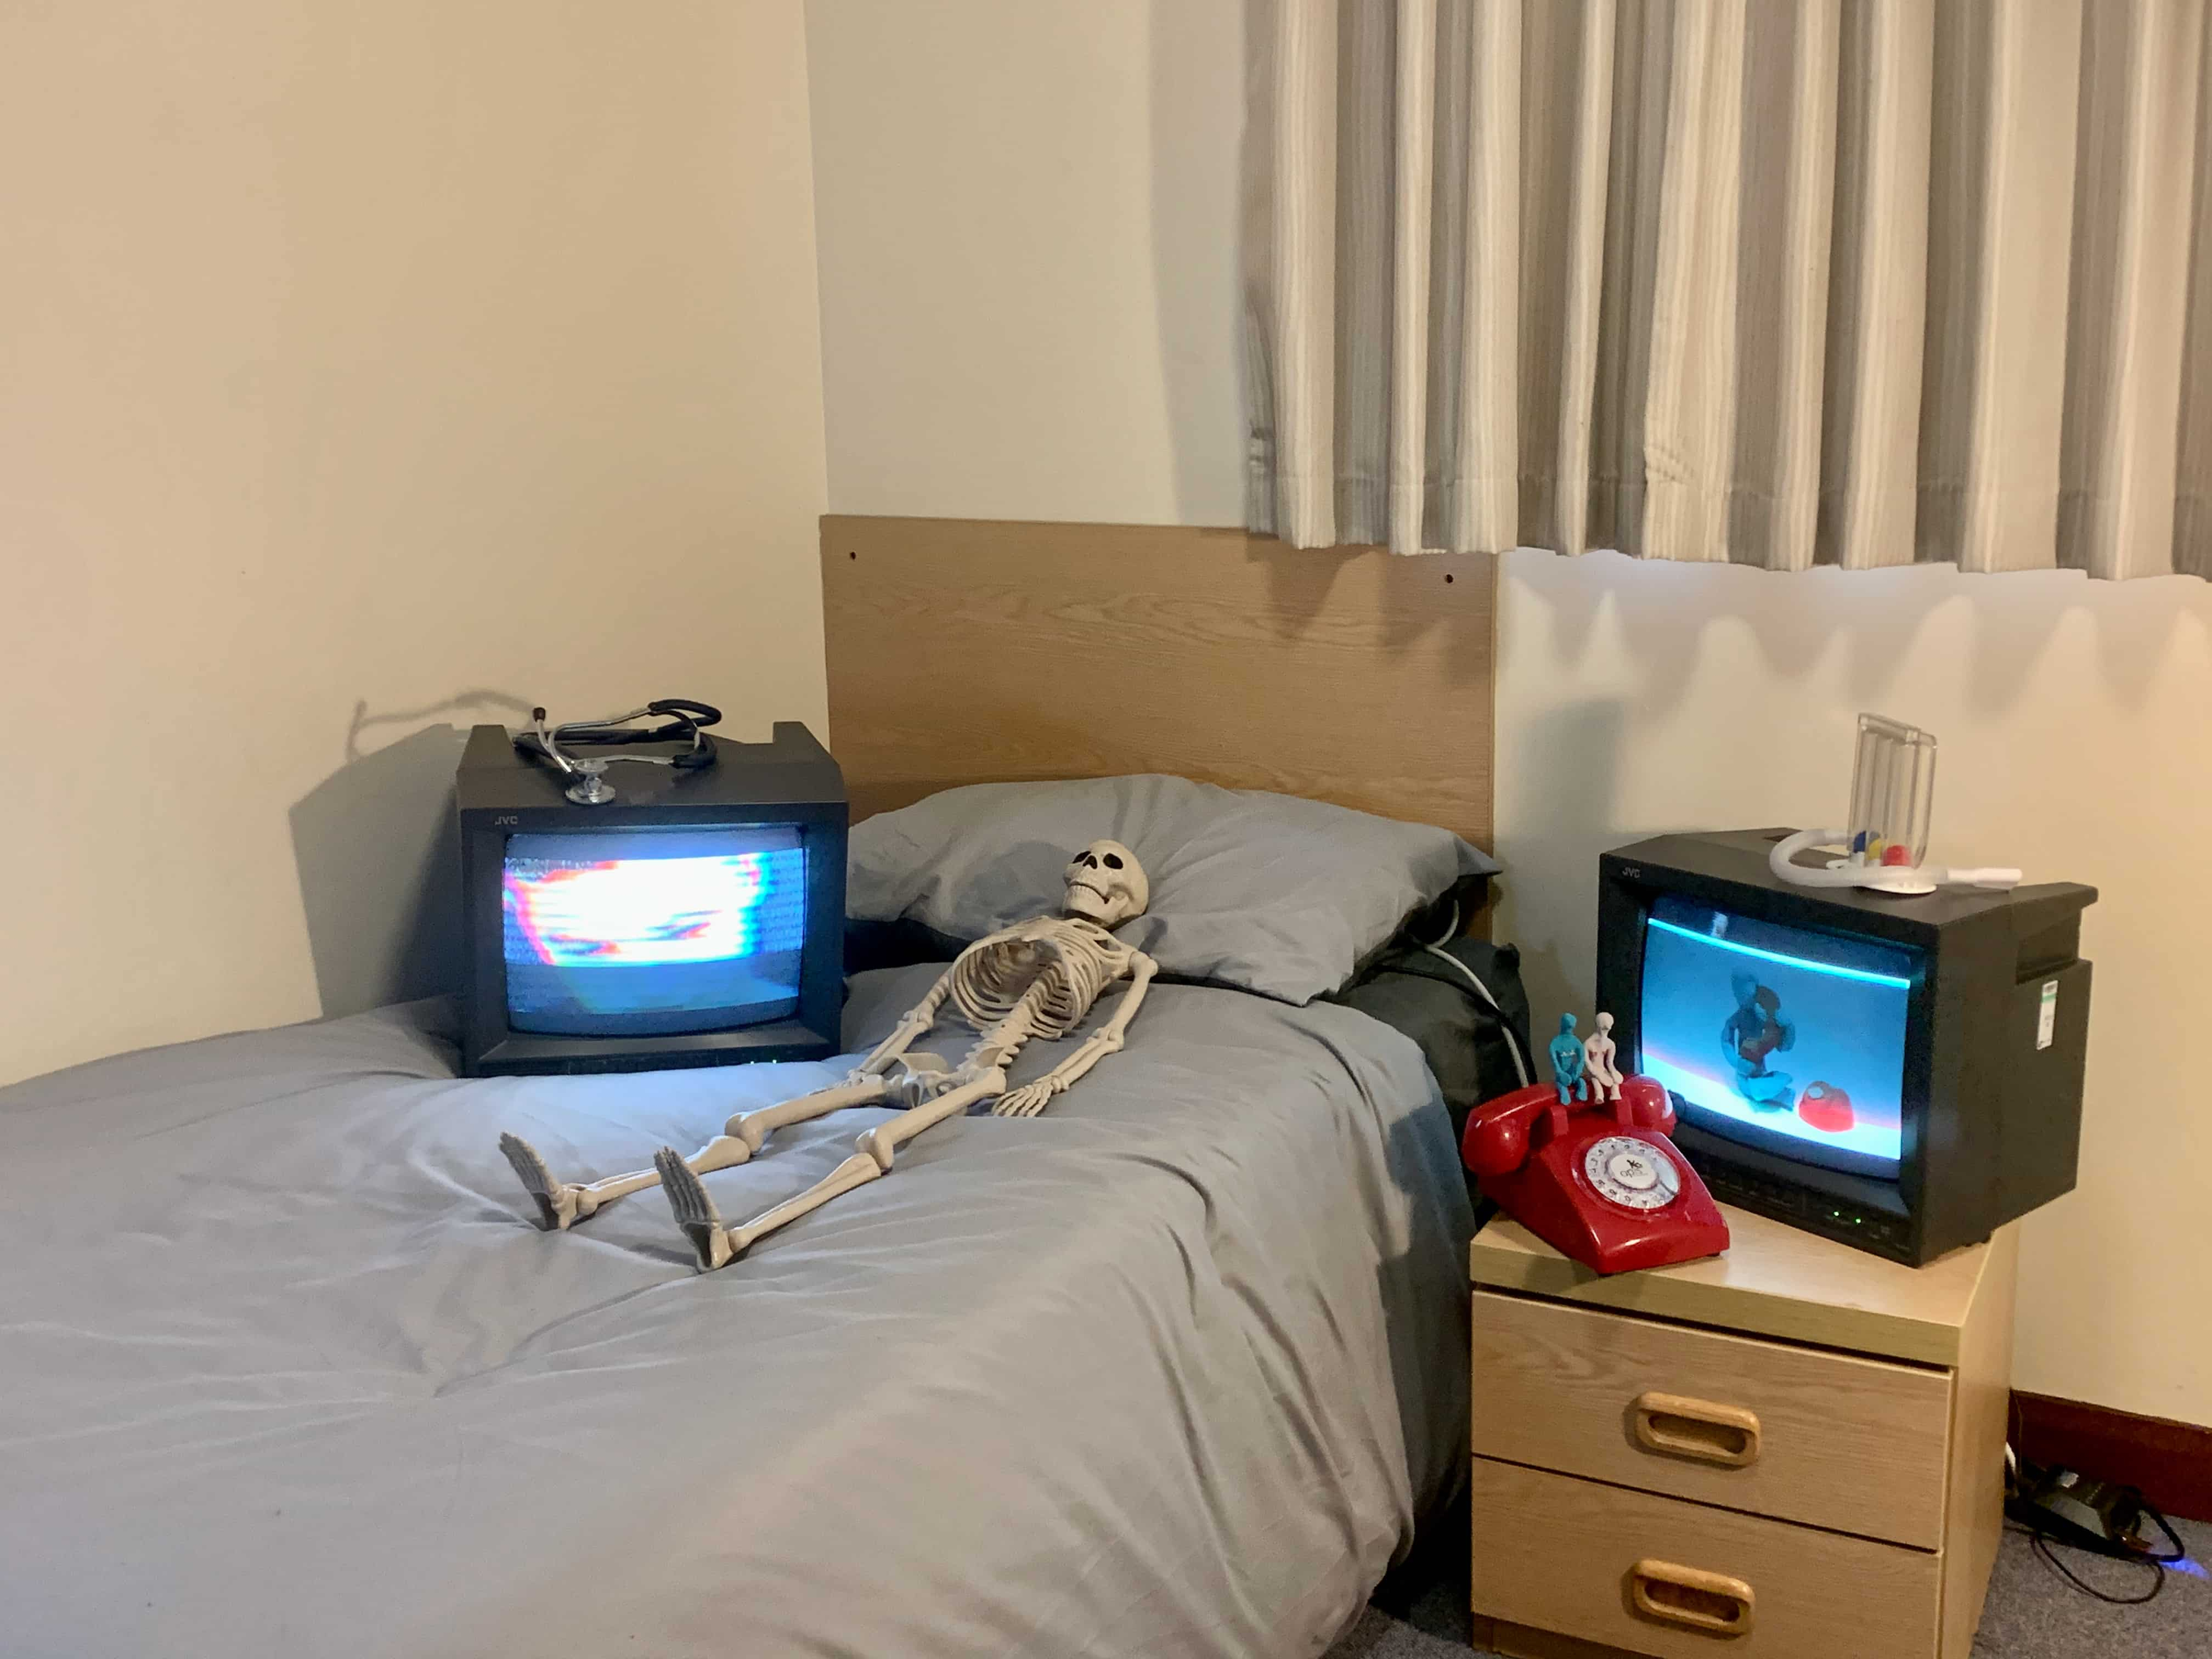 2 TVs with skeleton on bed